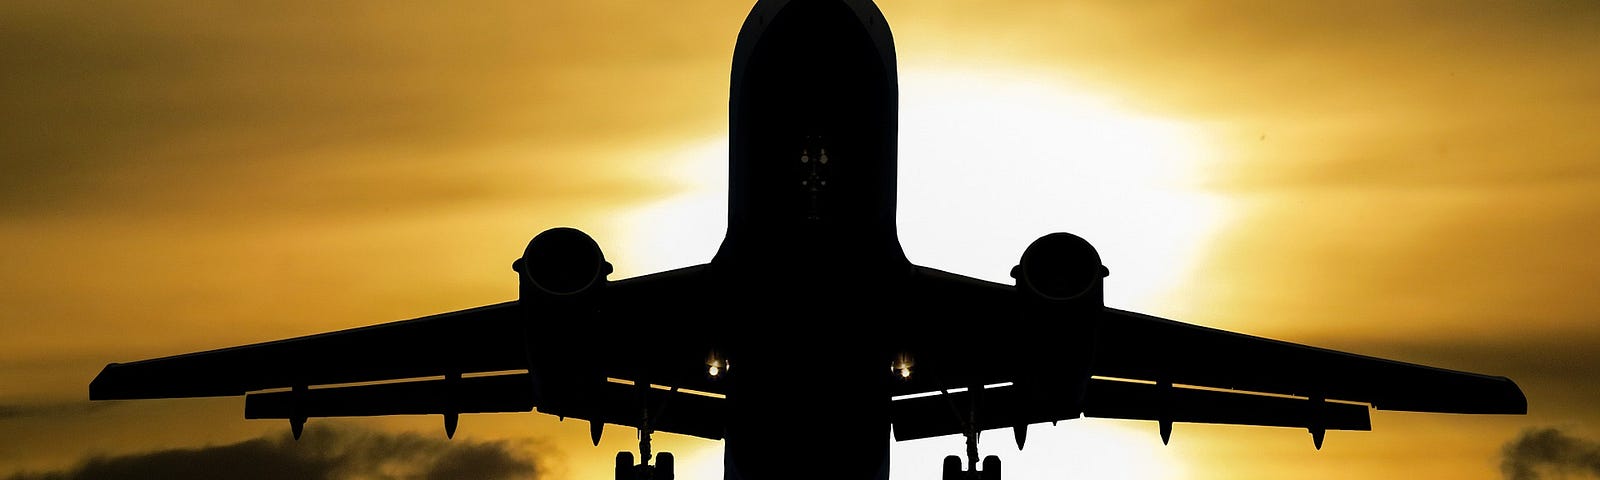 airplane silhouette with the sun and clouds in background